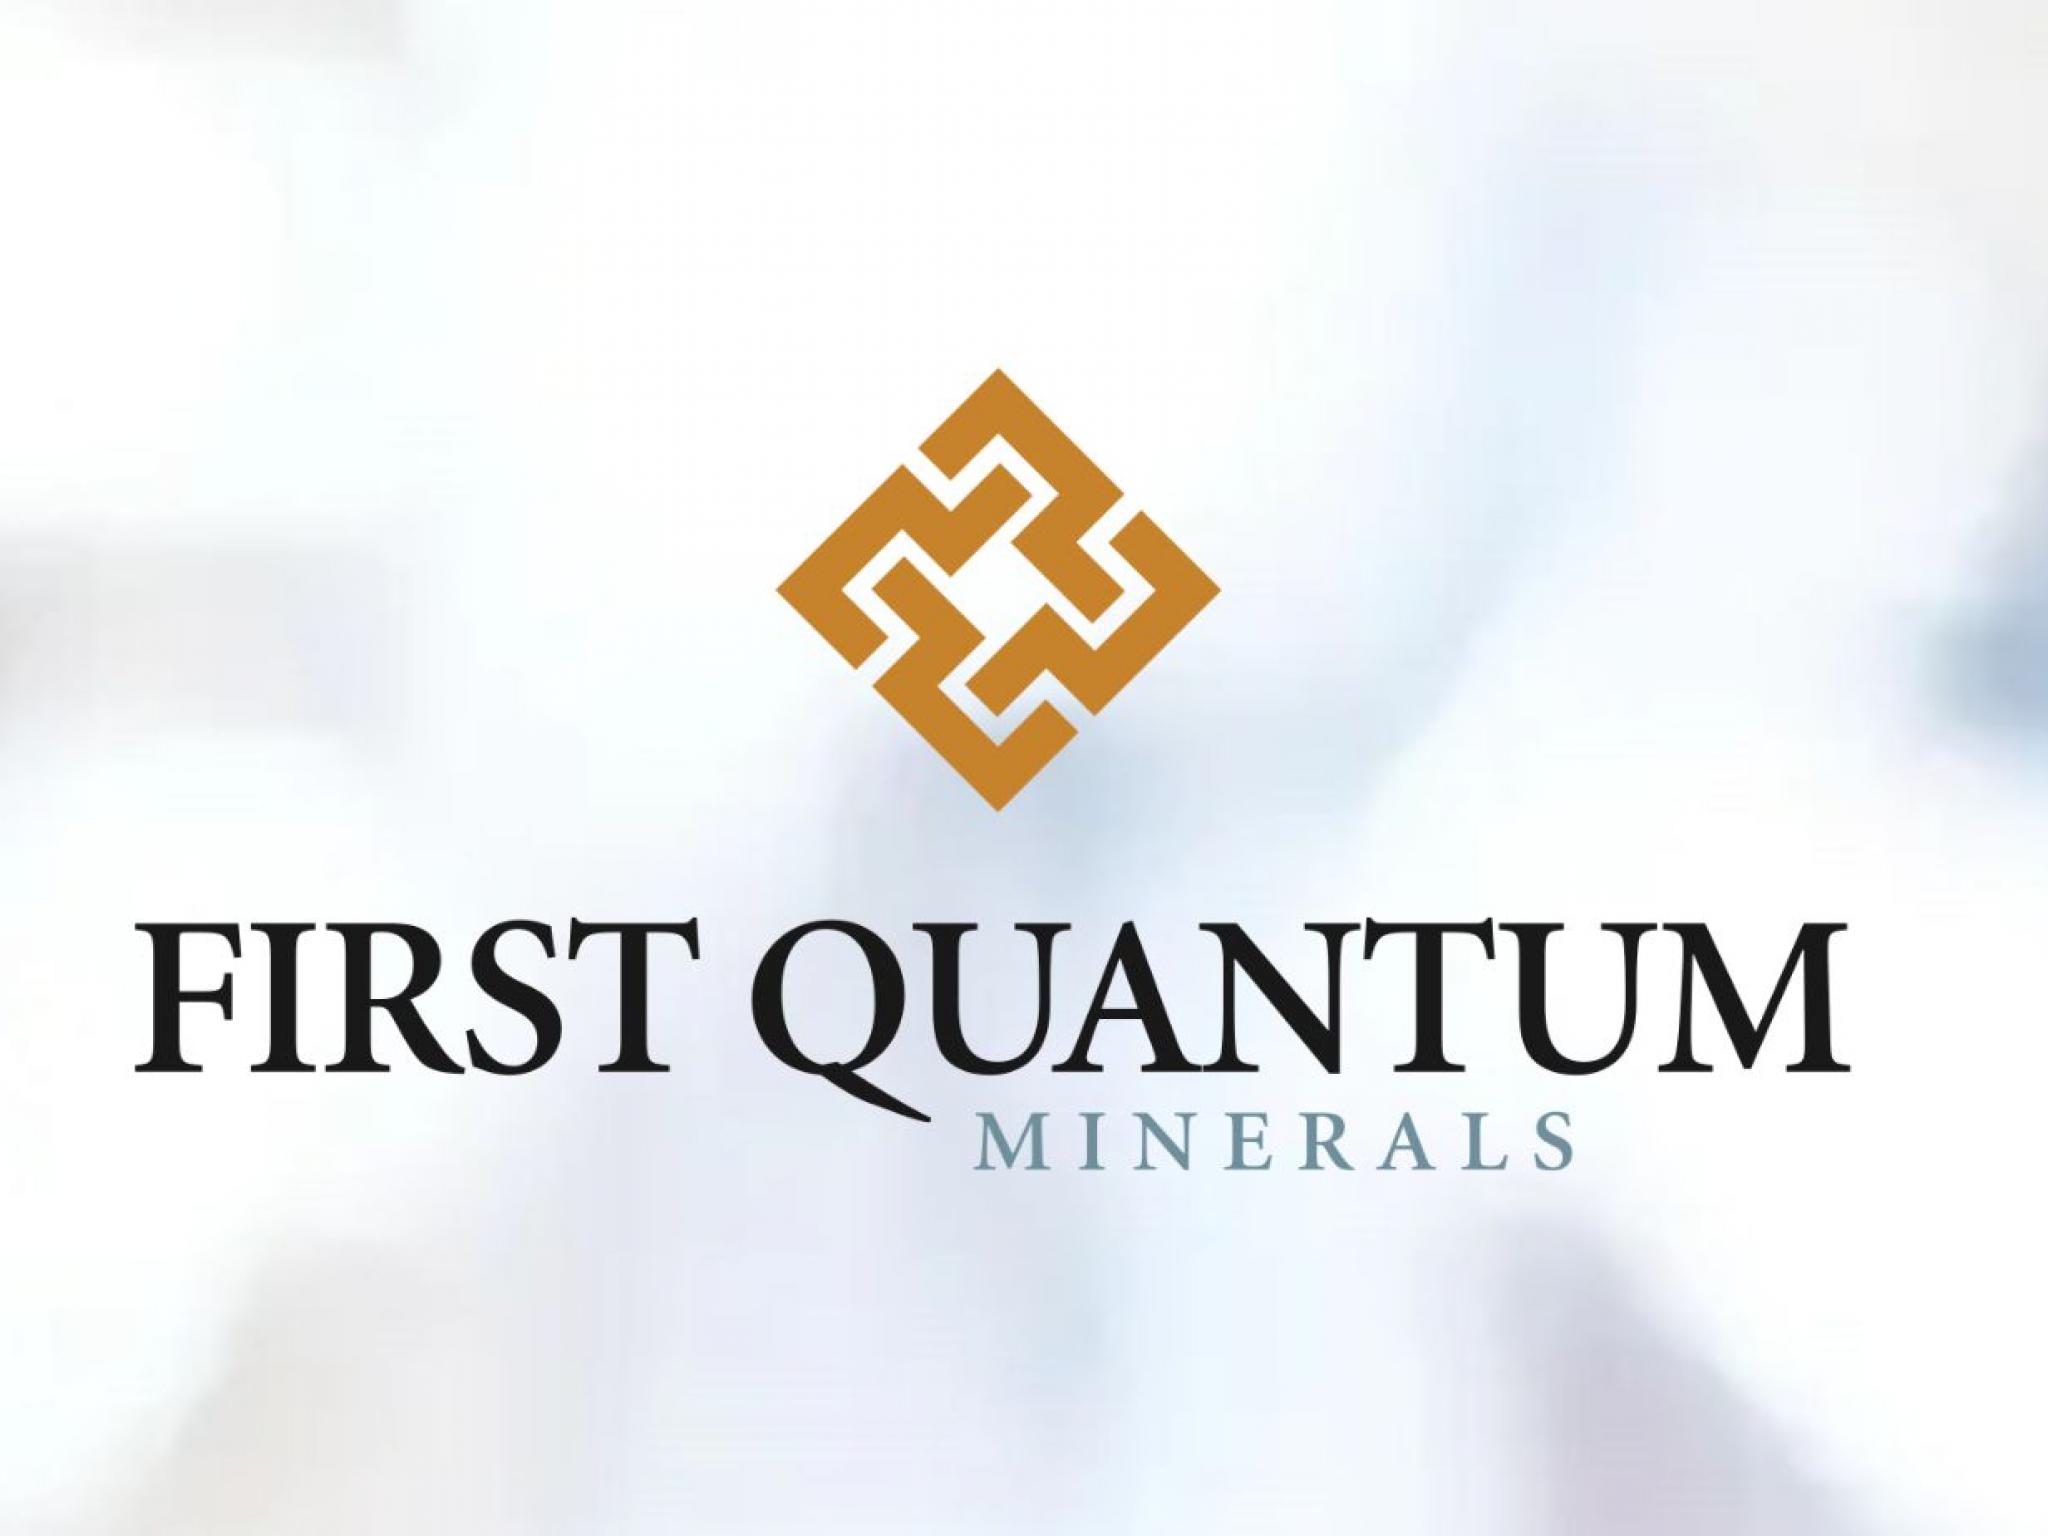  first-quantum-minerals-has-a-key-wildcard-why-this-analyst-is-turning-bullish 